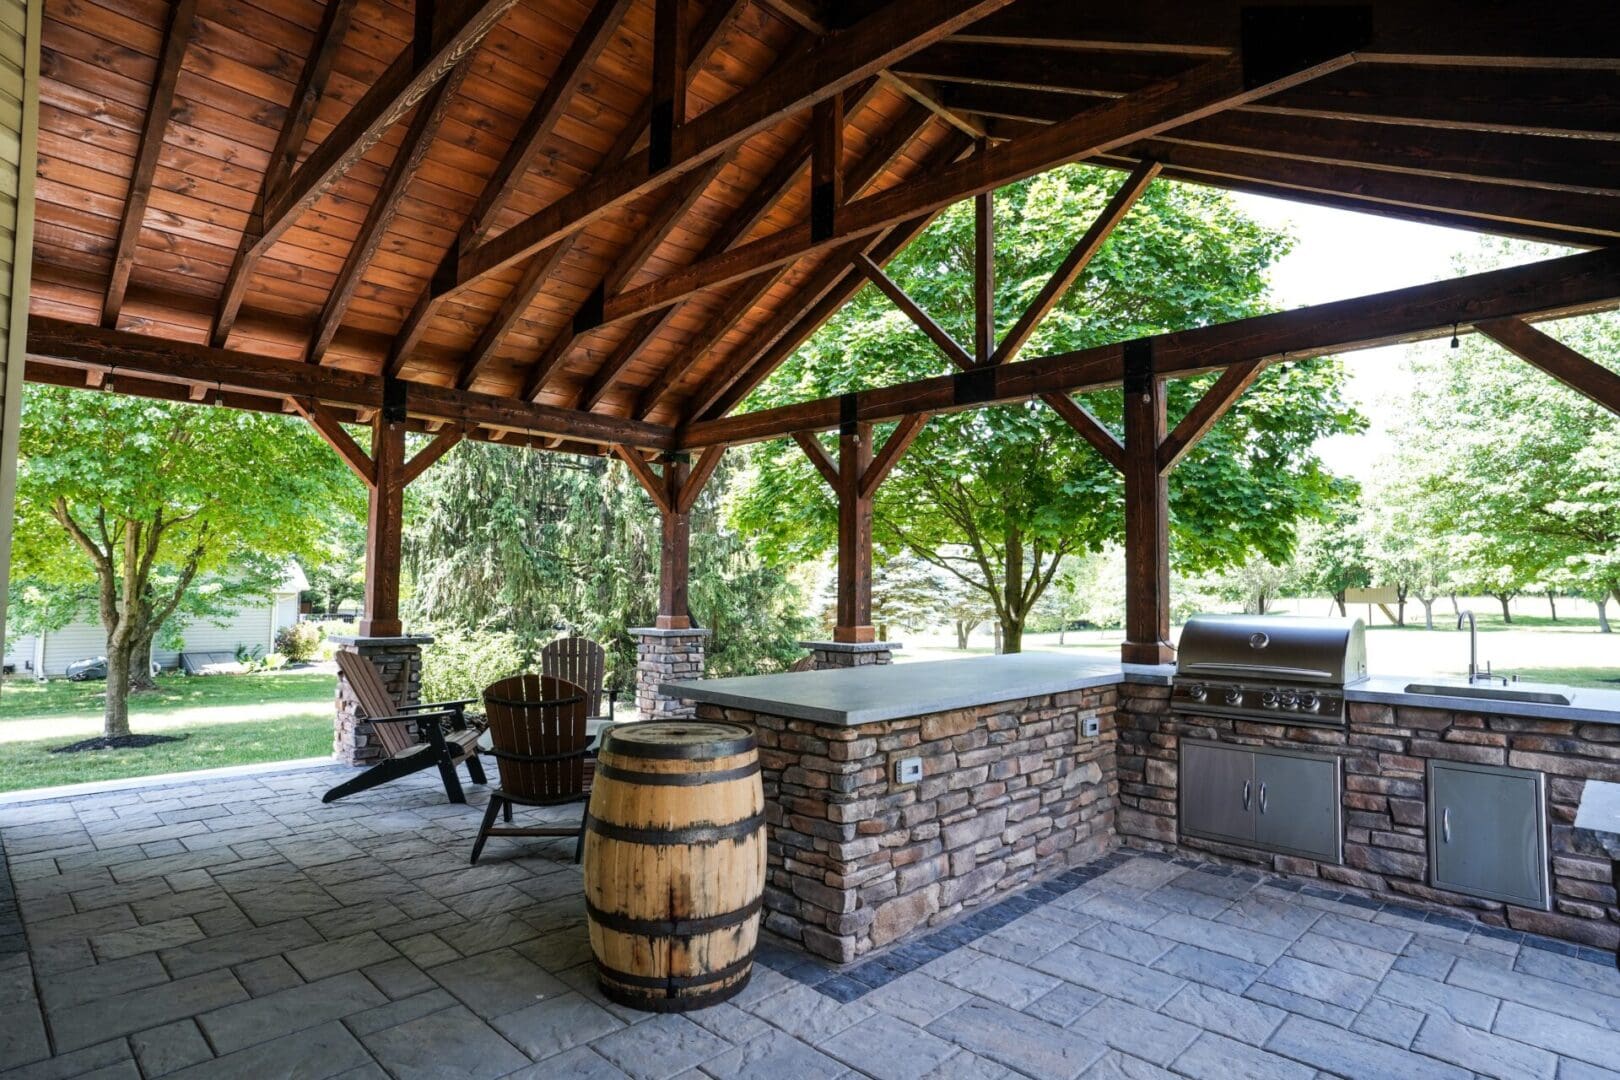 A custom outdoor kitchen with a fireplace and bbq.